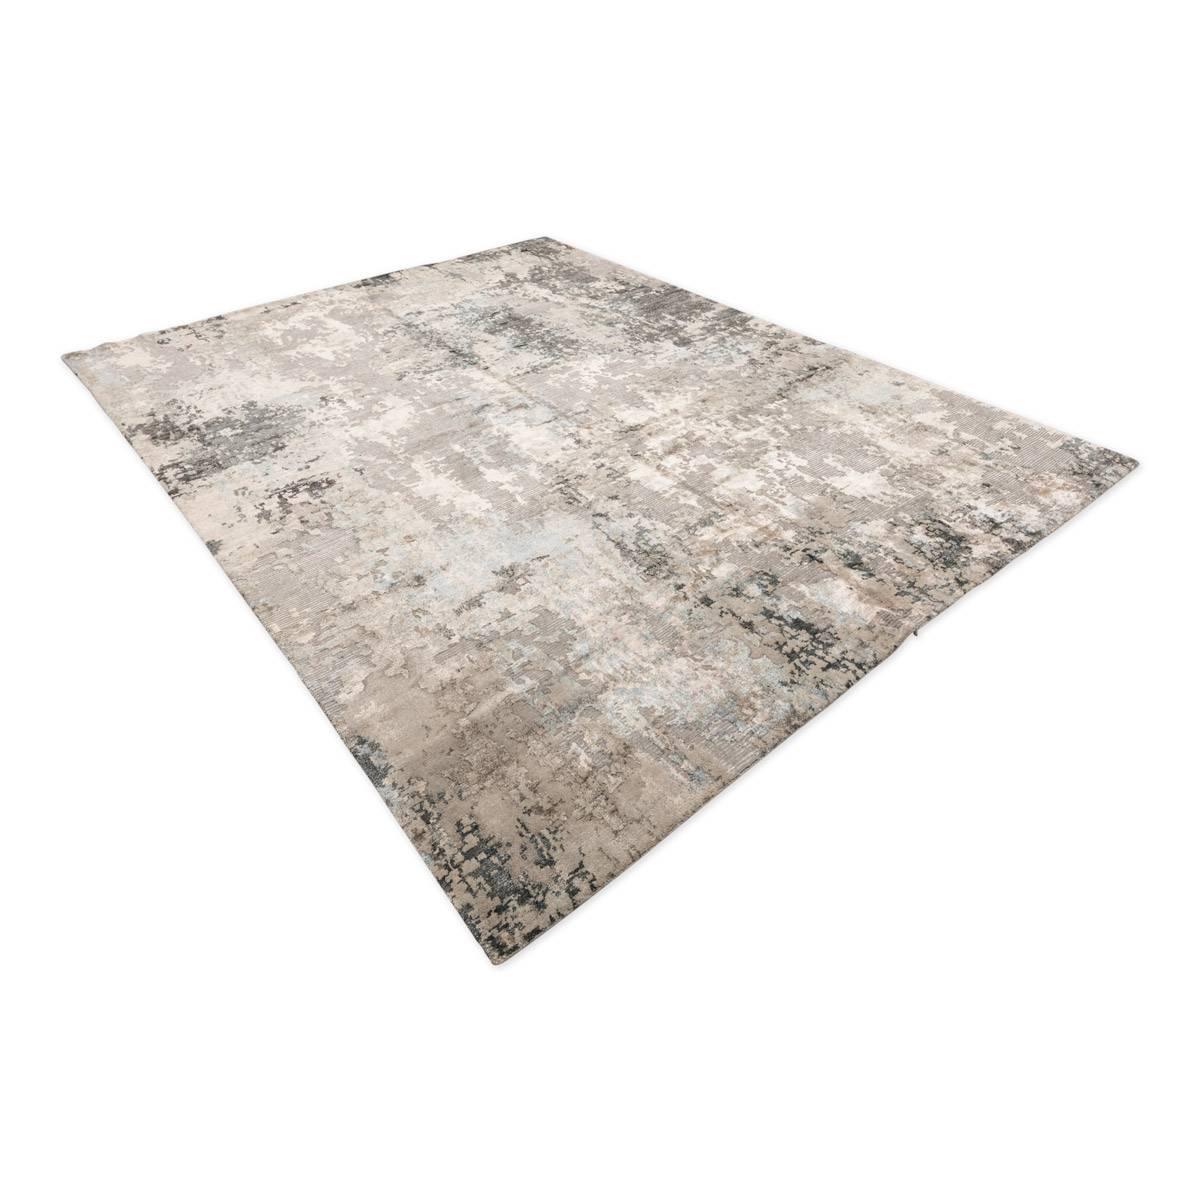 Modern Contemporary Silk and Wool Rug, Abstract Design over Gray Tones